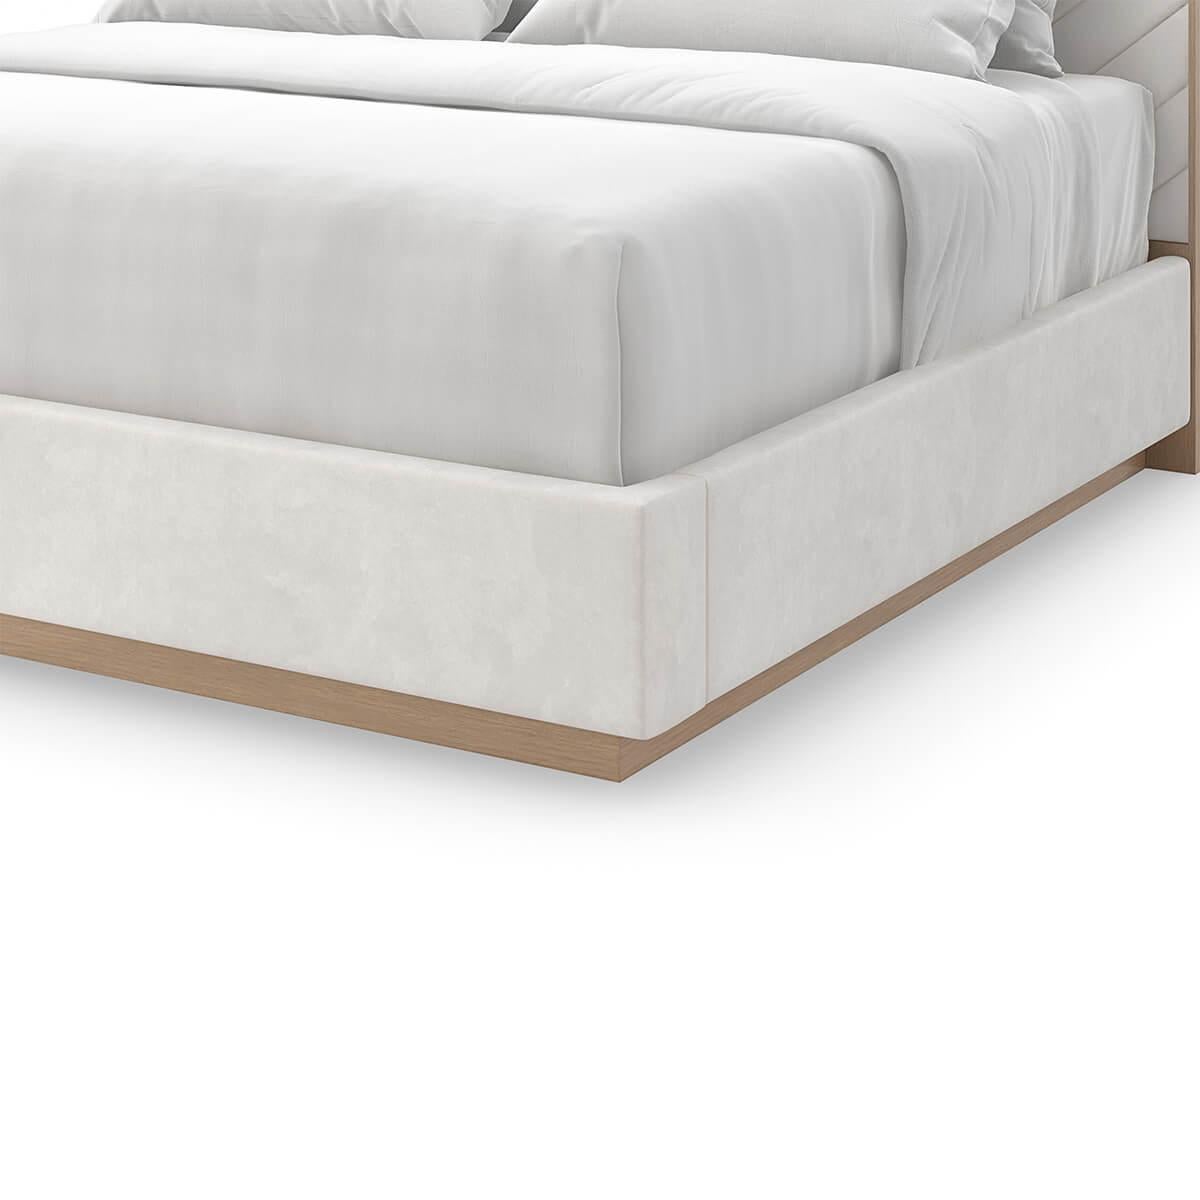 Asian Cream Chevron Tufted Upholstered King Bed For Sale